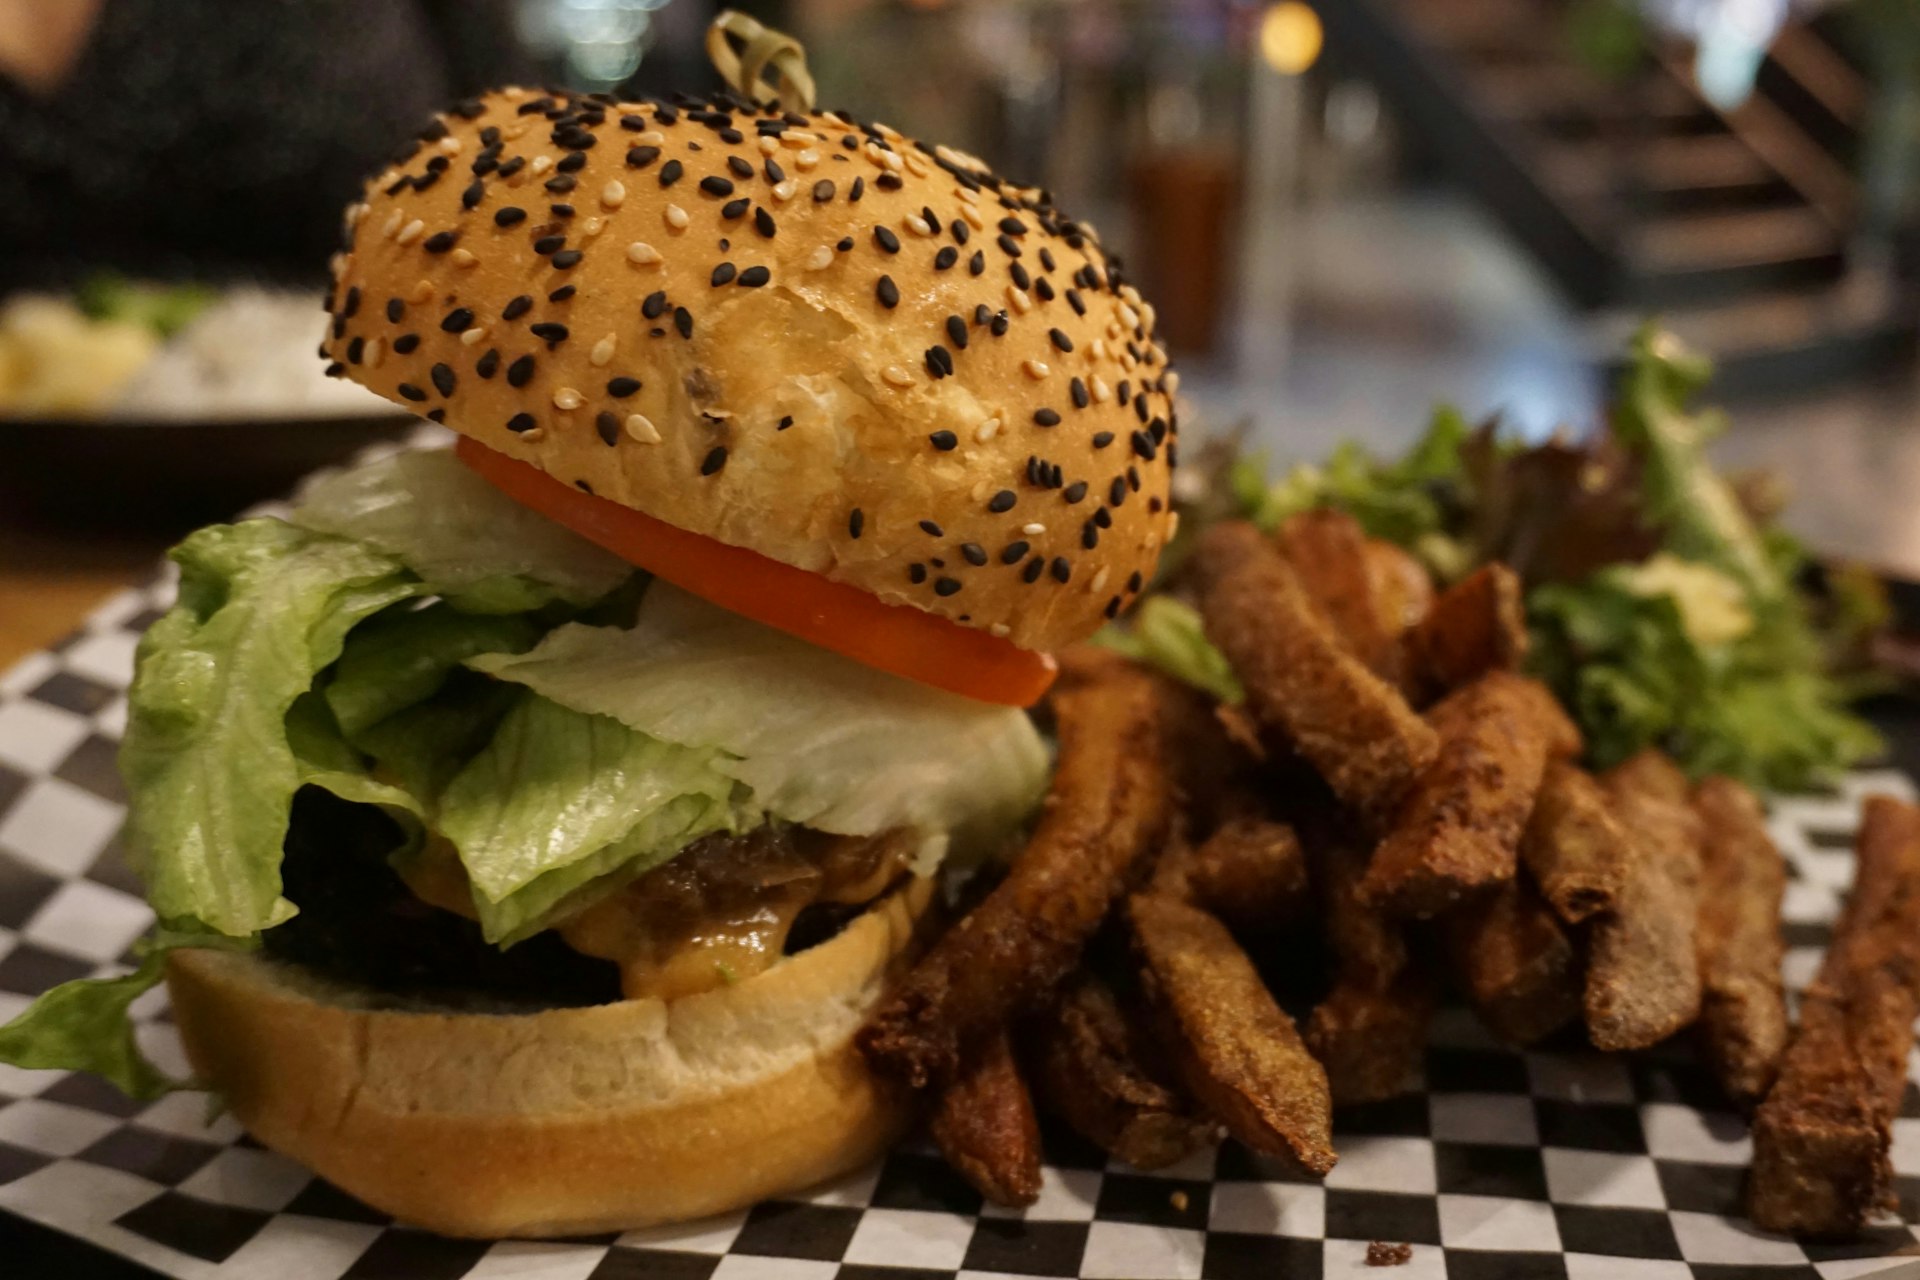 A large vegan burger is sitting on a piece of checkerboard-print paper alongside well-done fries and salad leaves. The burger is stuffed with salad and the bun is topped with black and white sesame seeds.